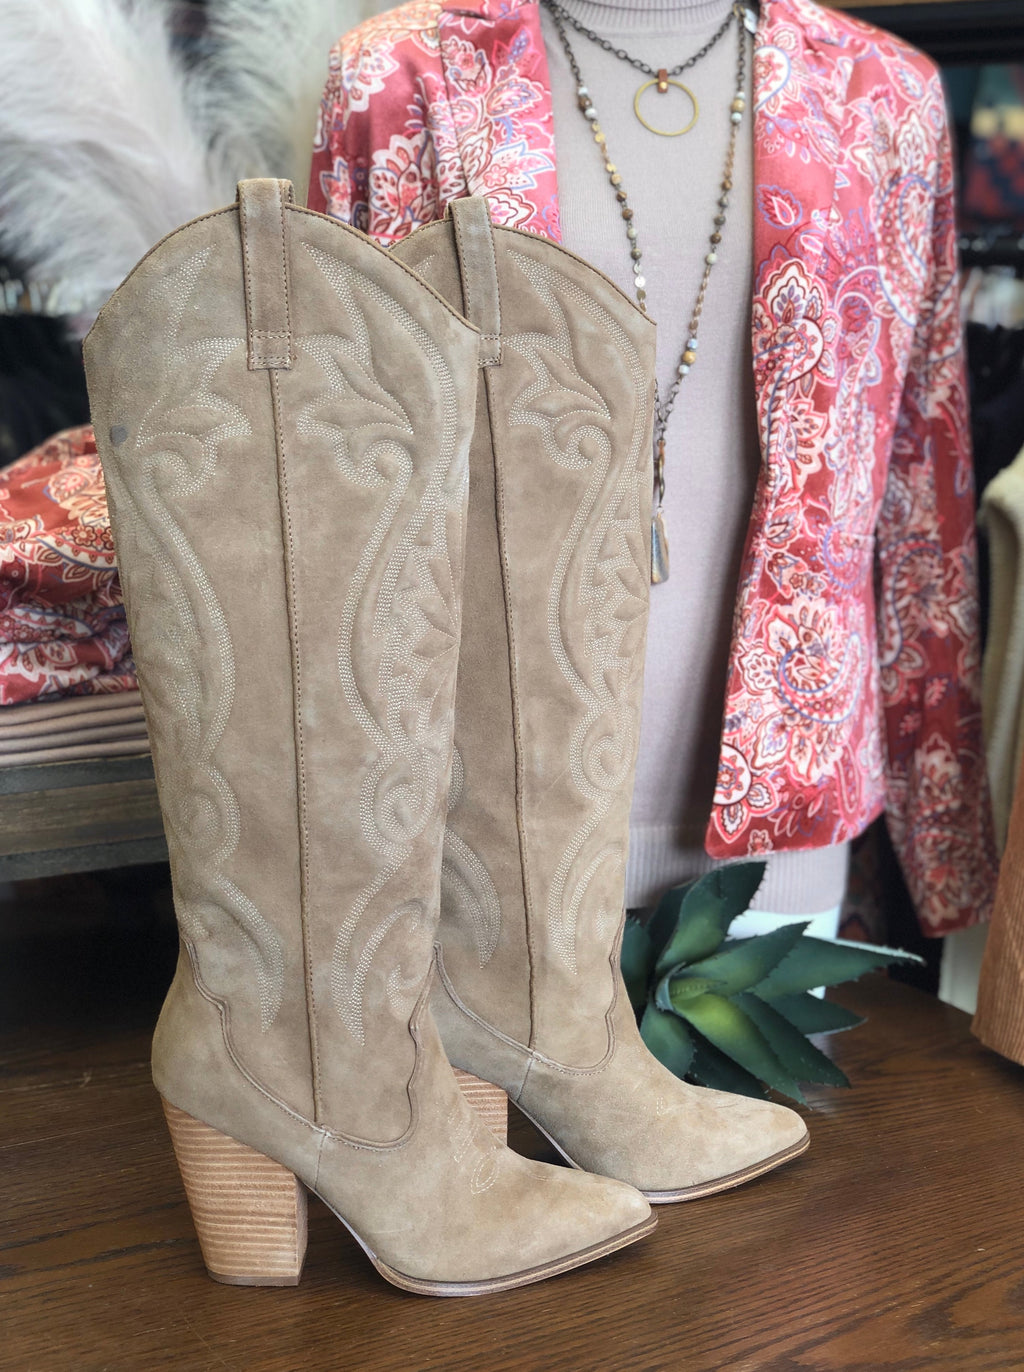 Steve Madden Lasso Boots in Chestnut Suede